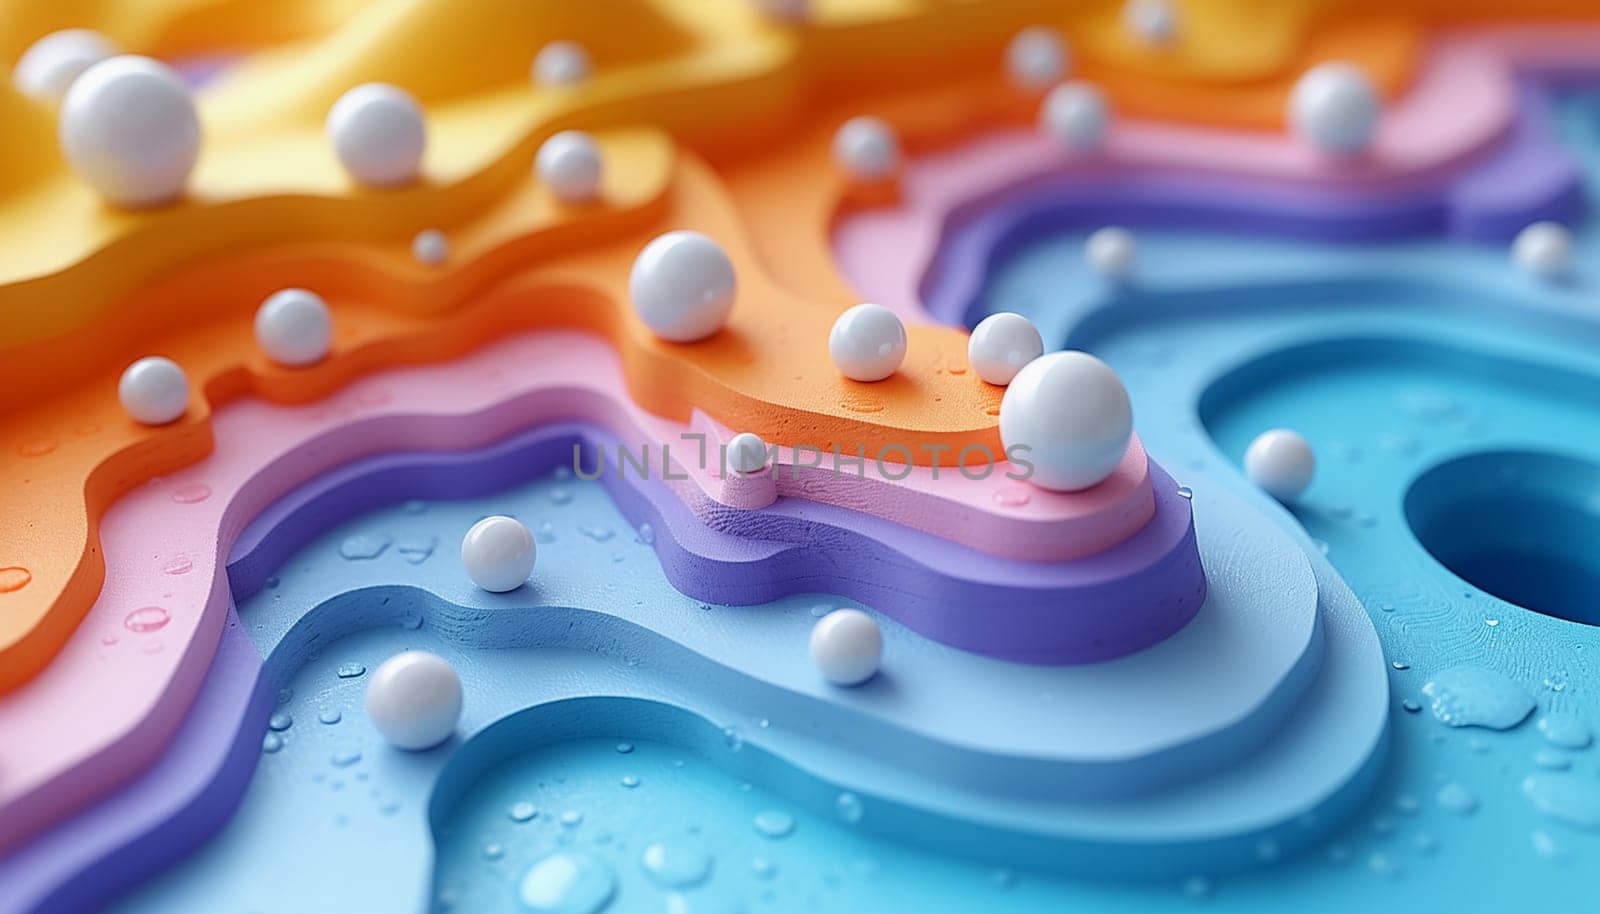 Abstract multicolored bright background by Nadtochiy